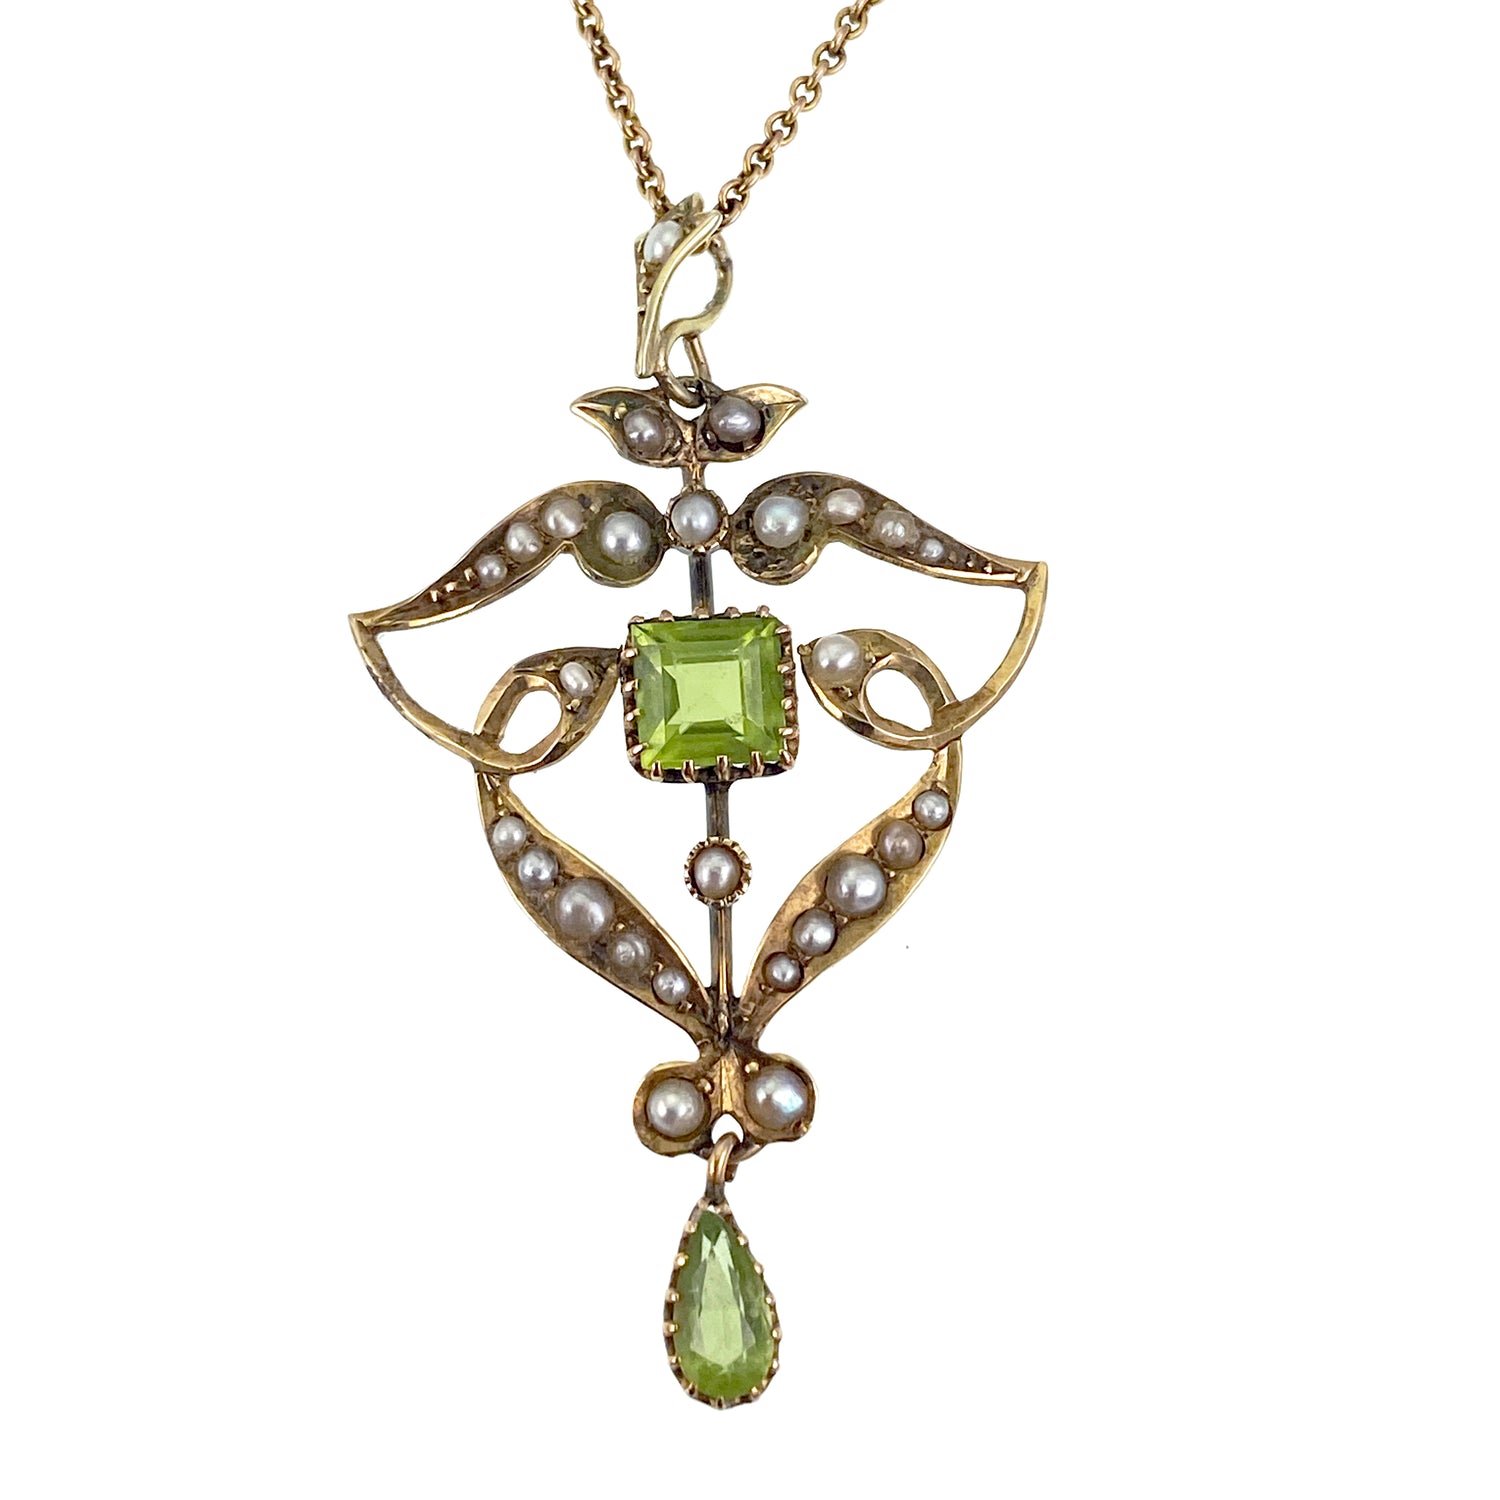 Antique British 9k Rose Gold Peridot & Pearl Pendant | Exquisite Jewelry  for Every Occasion | FWCJ